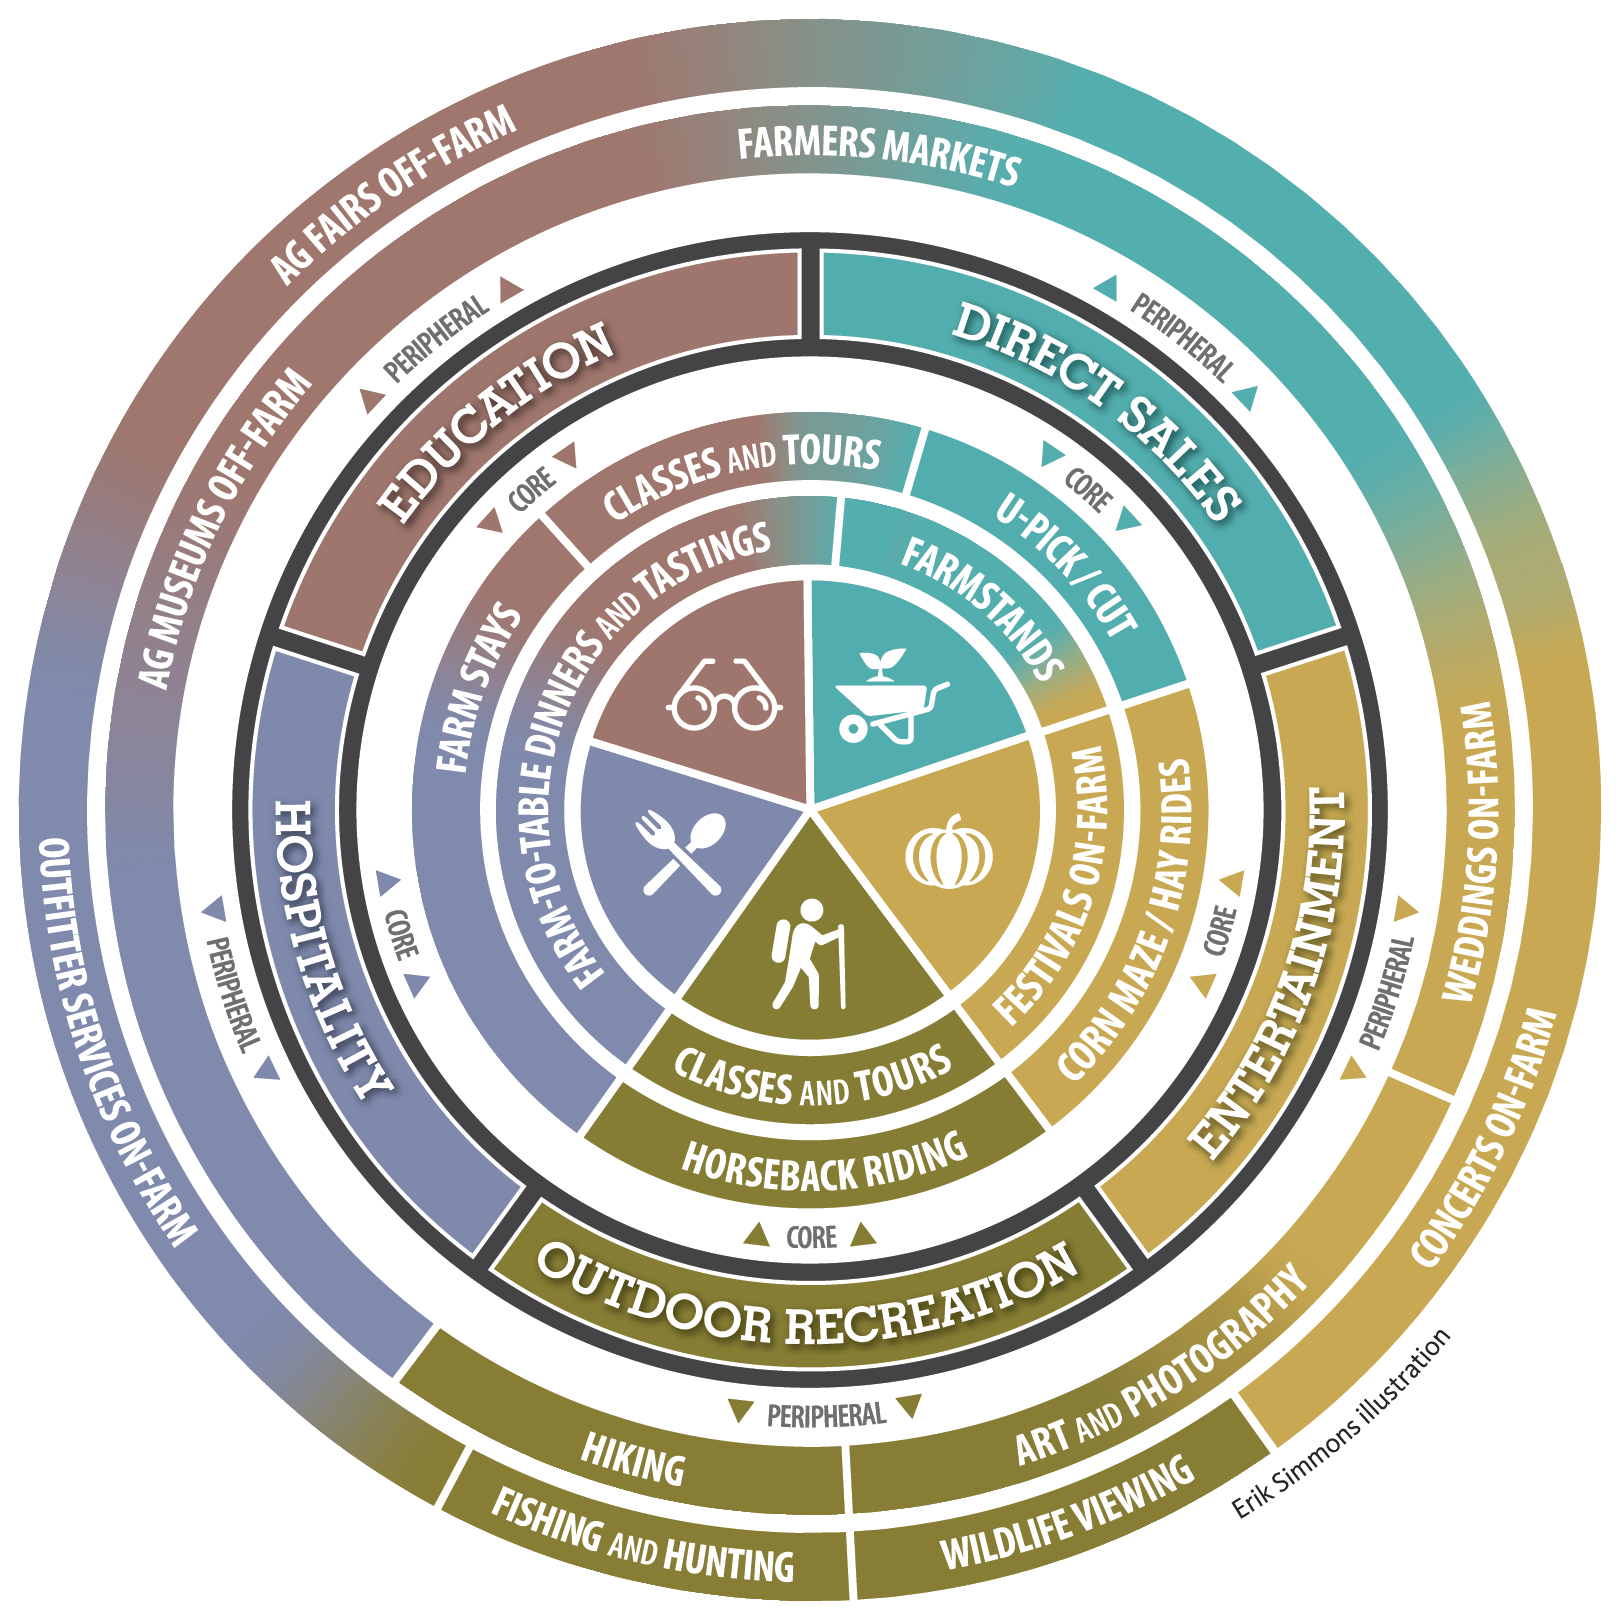 Circular infographic showing agritourism can take the form of hospitality, entertainment, direct sales, outdoor recreation and education